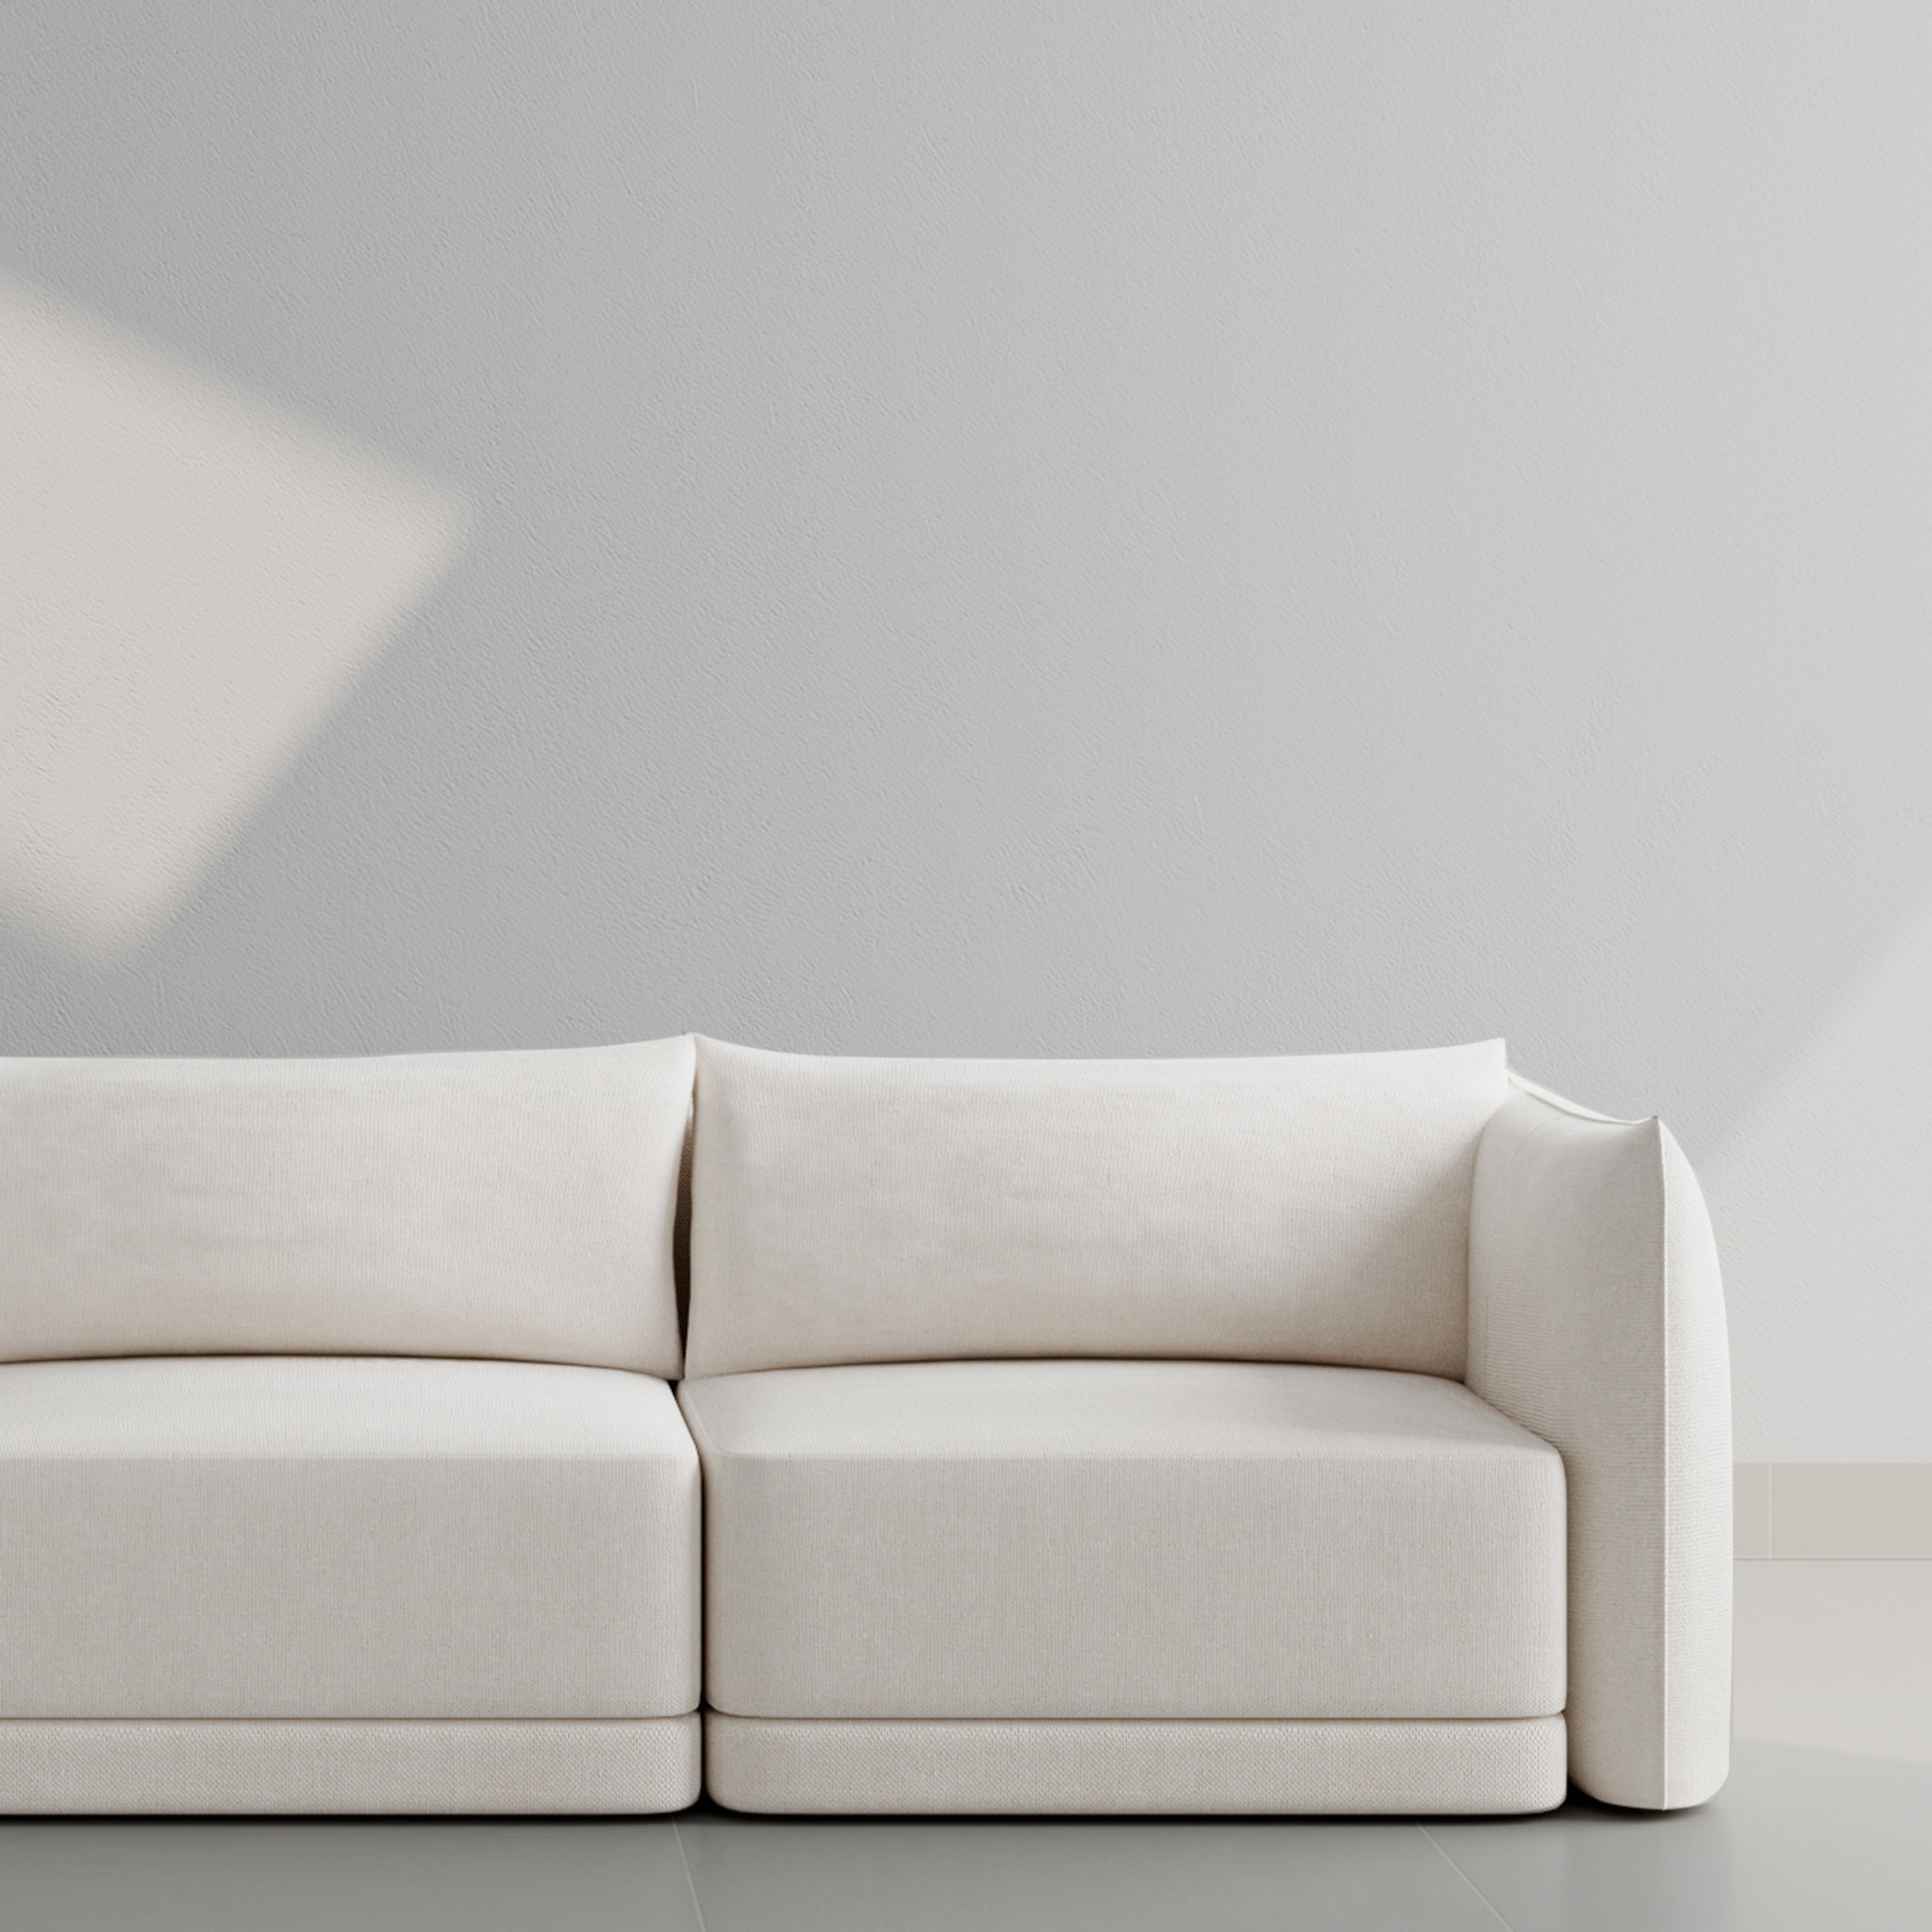 Minimalist white sofa against a light gray wall, showcasing modern design and clean lines for a contemporary living space.